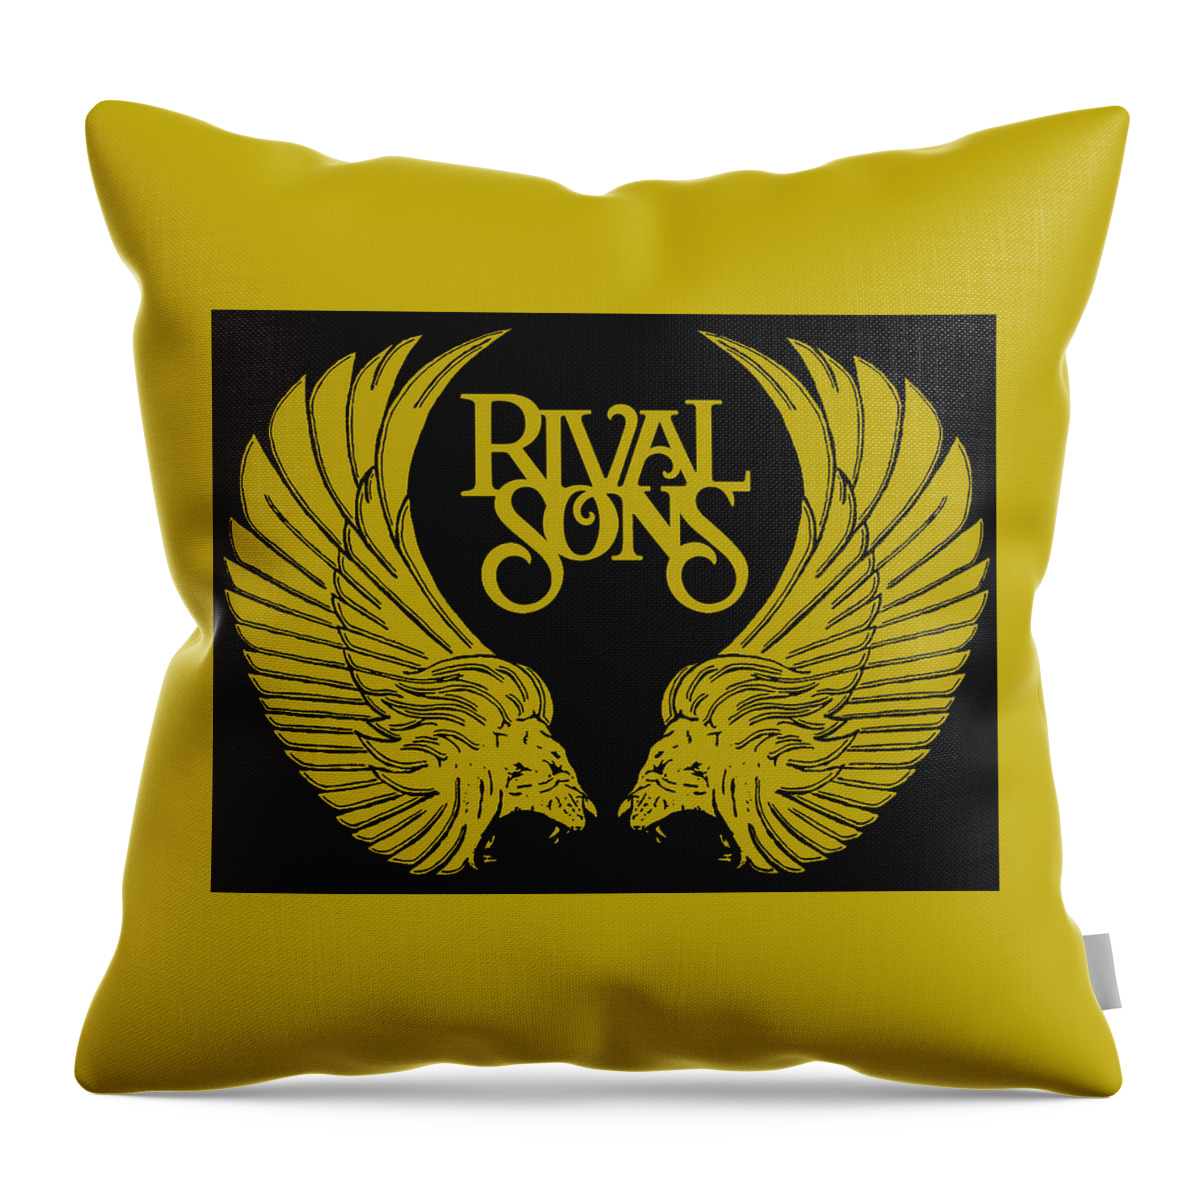 Funny Throw Pillow featuring the digital art Rival Sons Band #4 by Muspratt Giraud